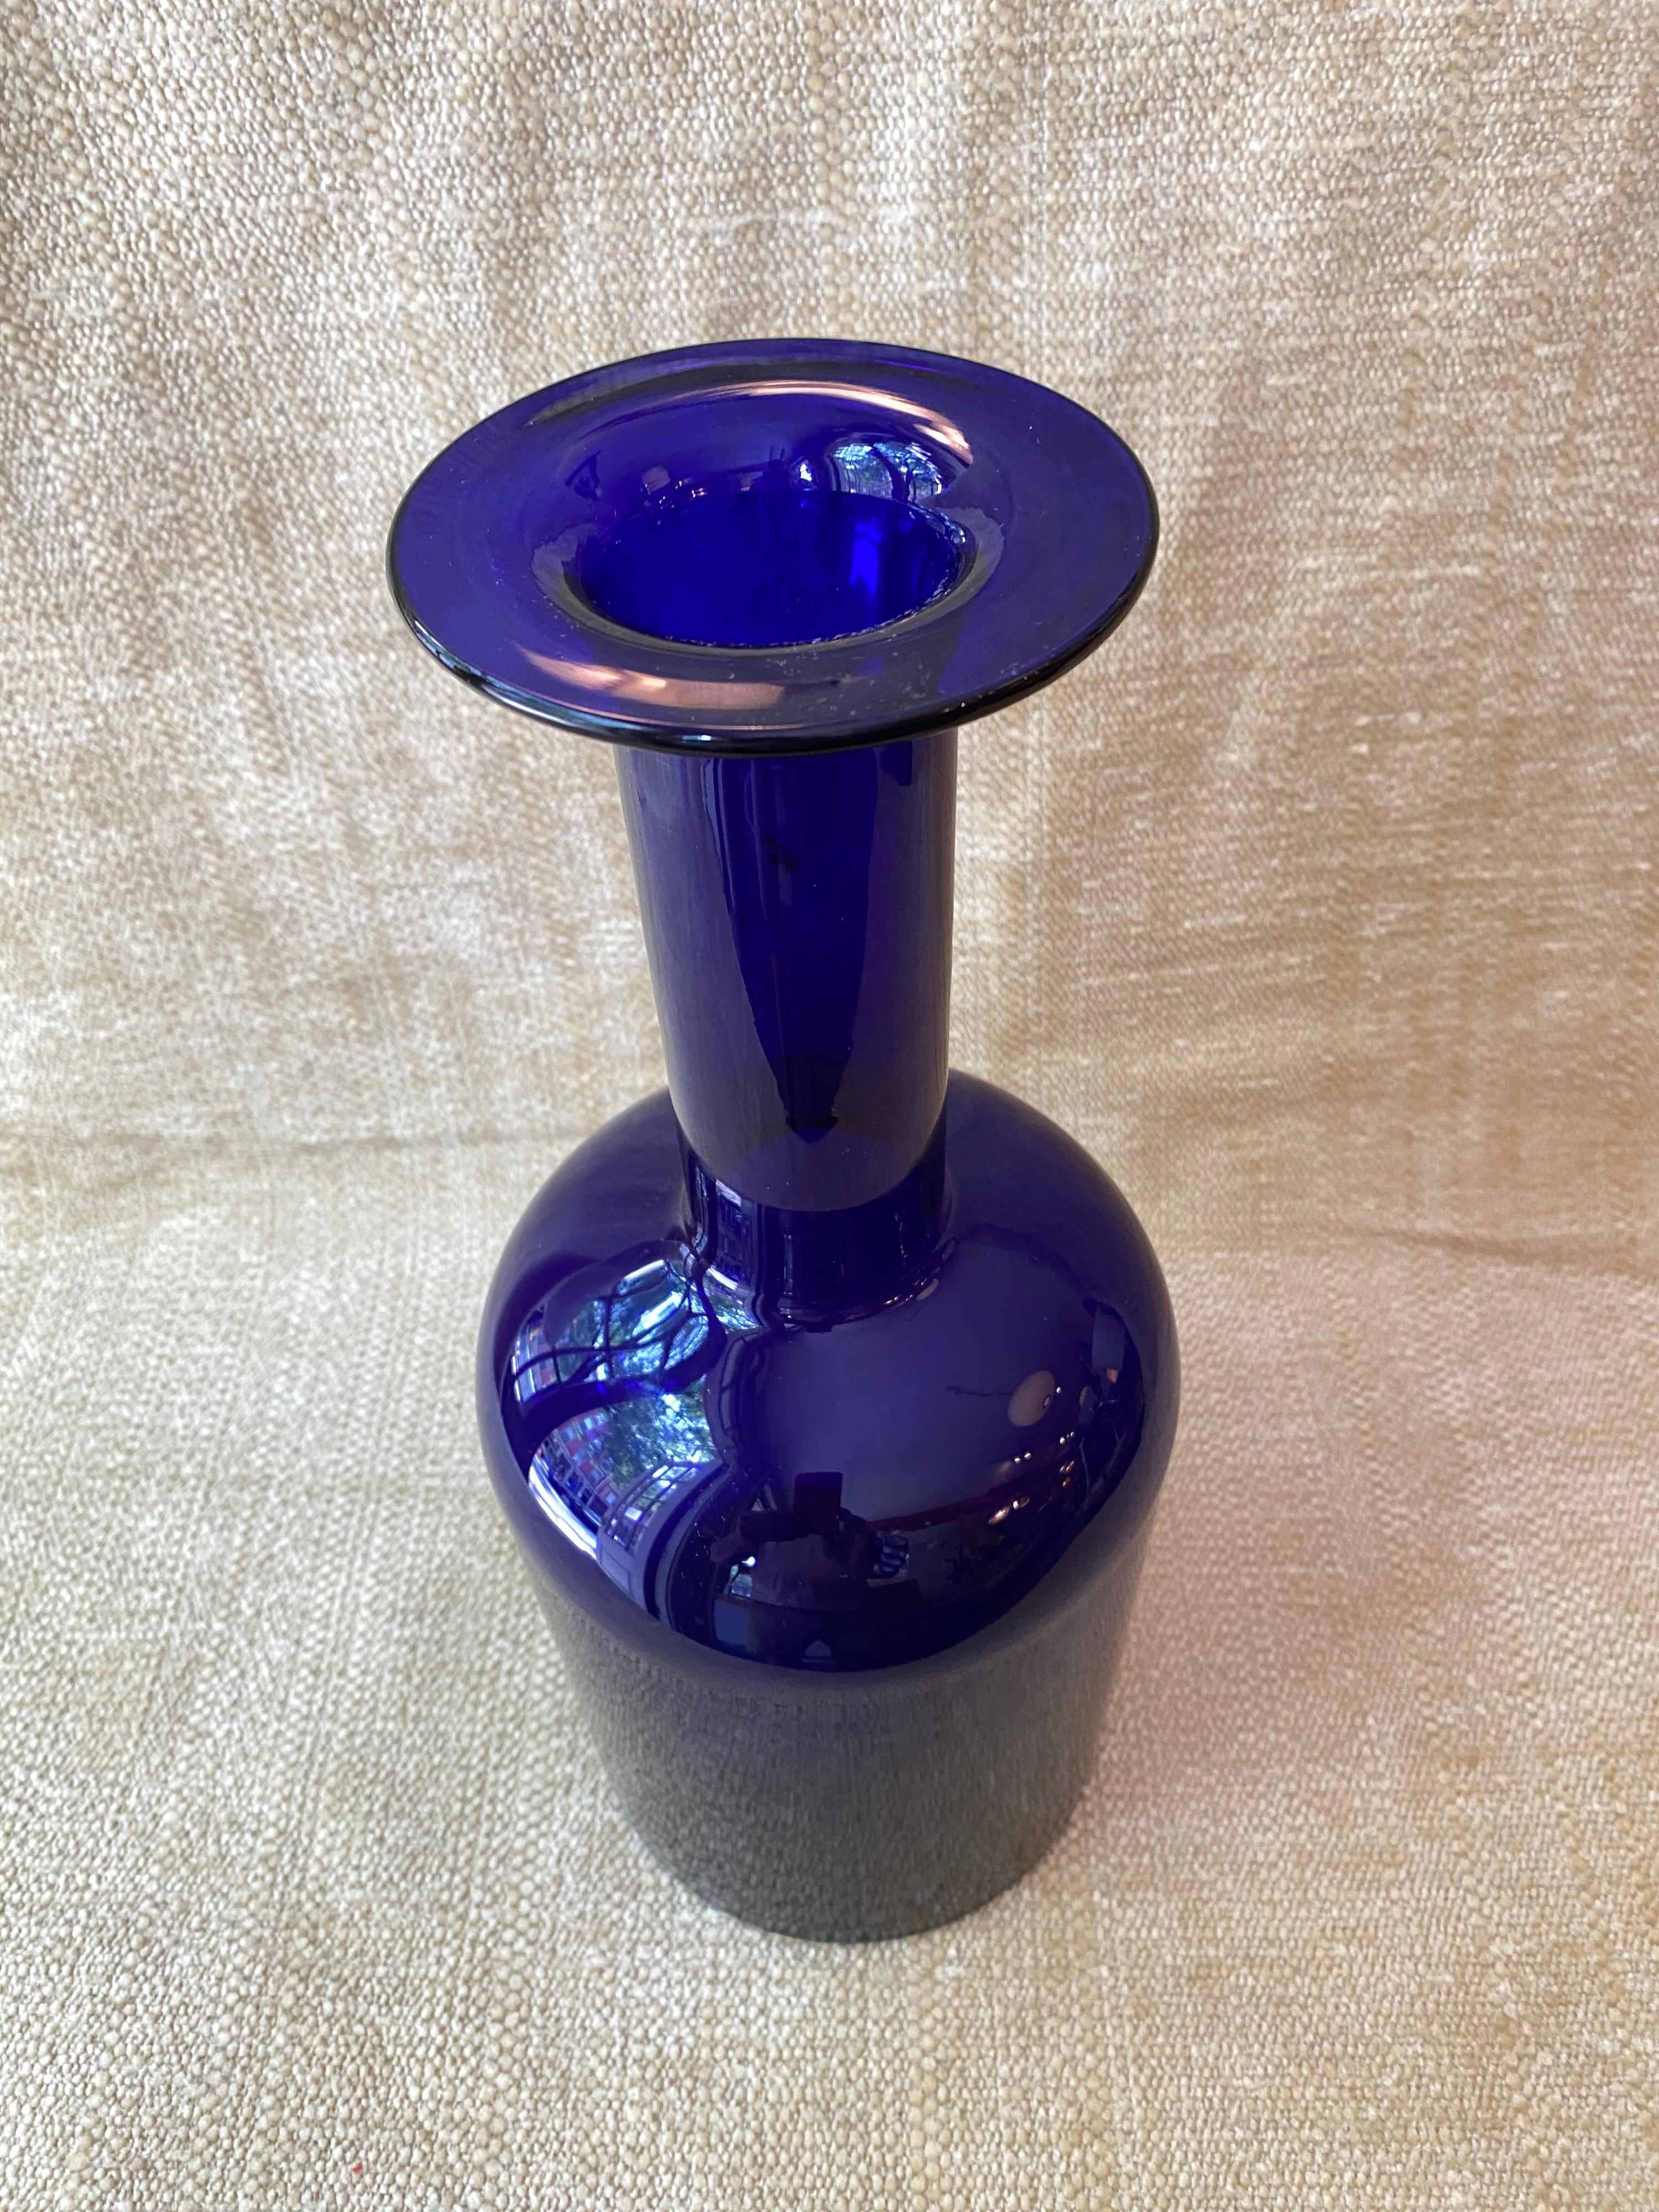 Otto Brauer for Holmegaard tall cobalt blue glass vase. Originally designed in 1959, were produced into the late 1970's. Vase is in very nice condition! Stands almost 15